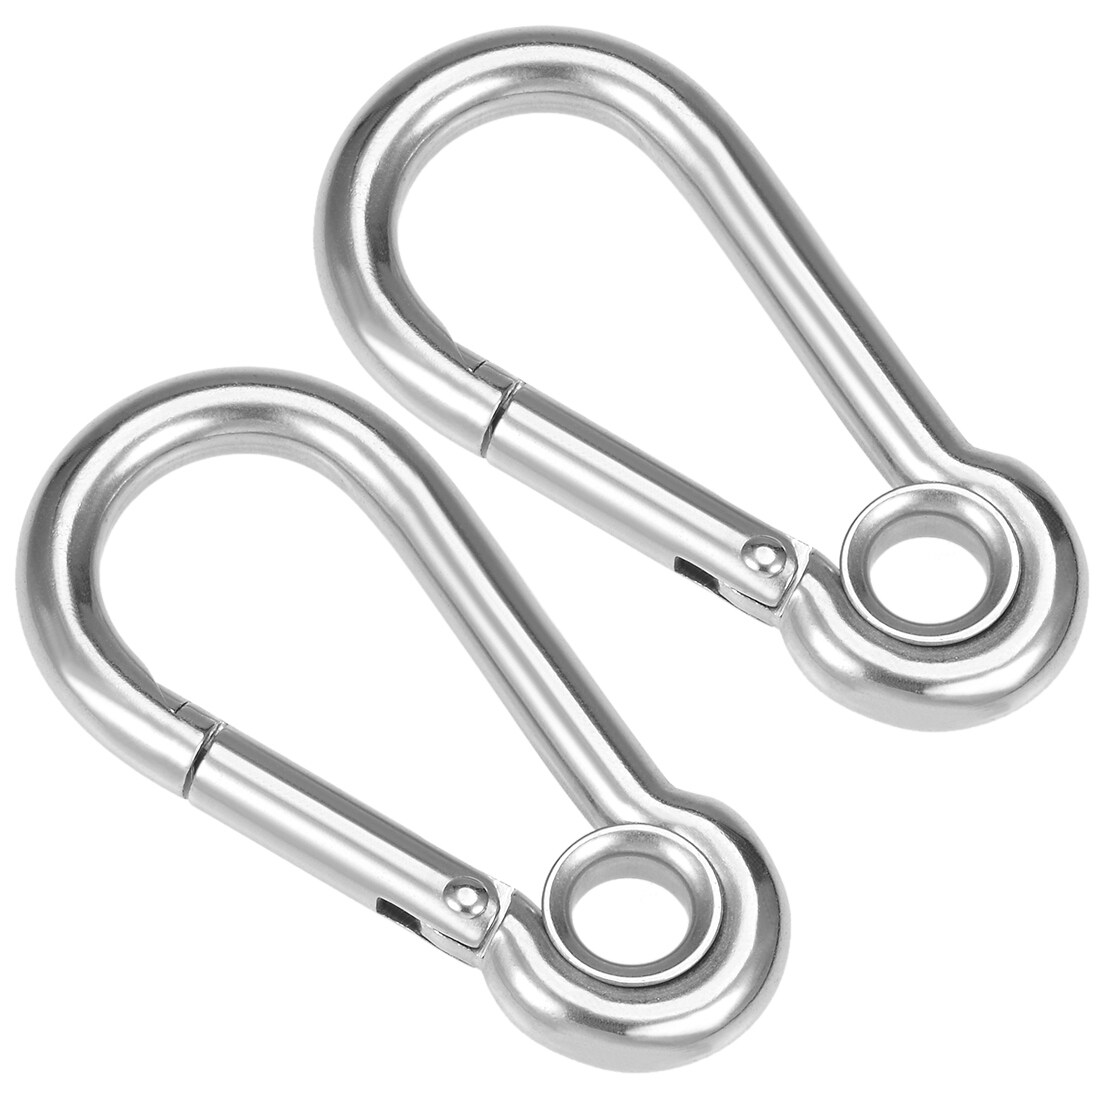 3pcs Solid Brass Stainless Steel Carabiner Spring Snap Hook Clip